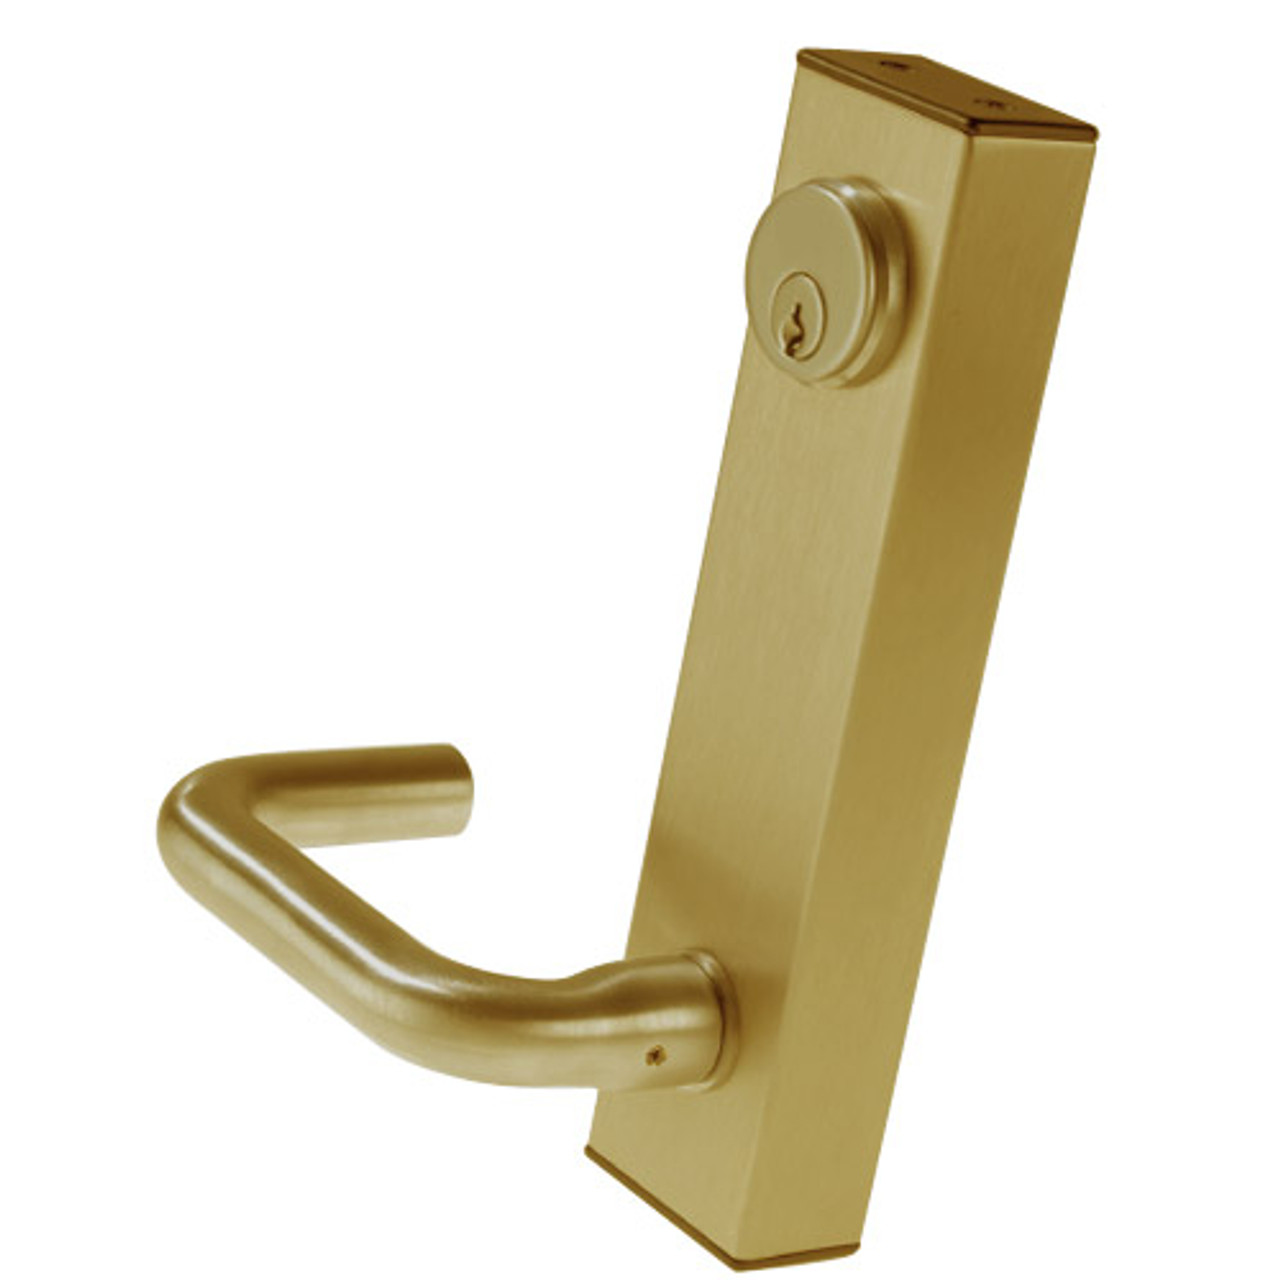 3080E-02-0-36-35 US4 Adams Rite Electrified Entry Trim with Round Lever in Satin Brass Finish